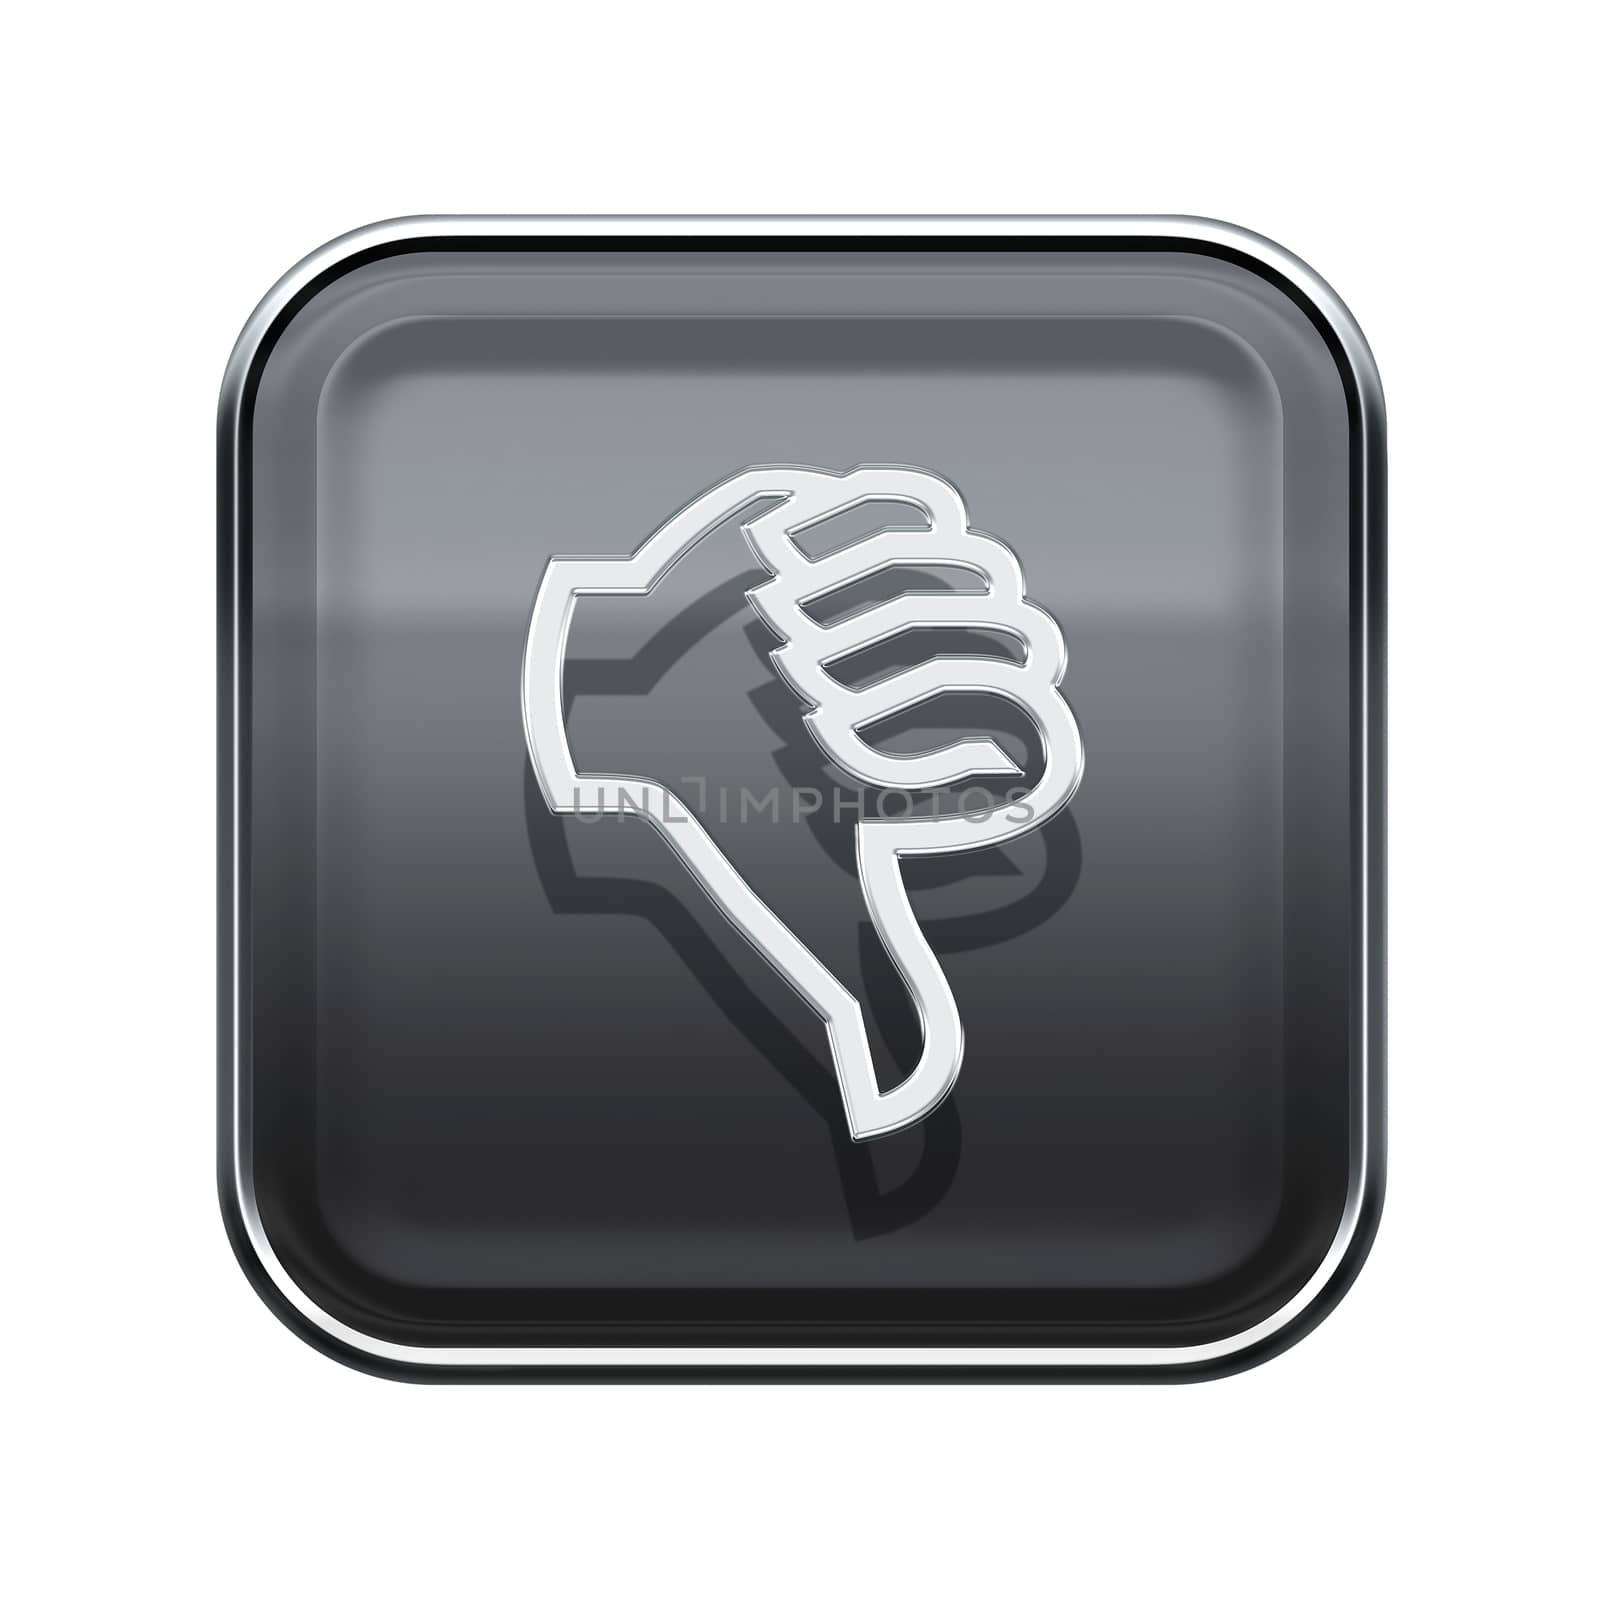 thumb down icon glossy grey, isolated on white background by zeffss